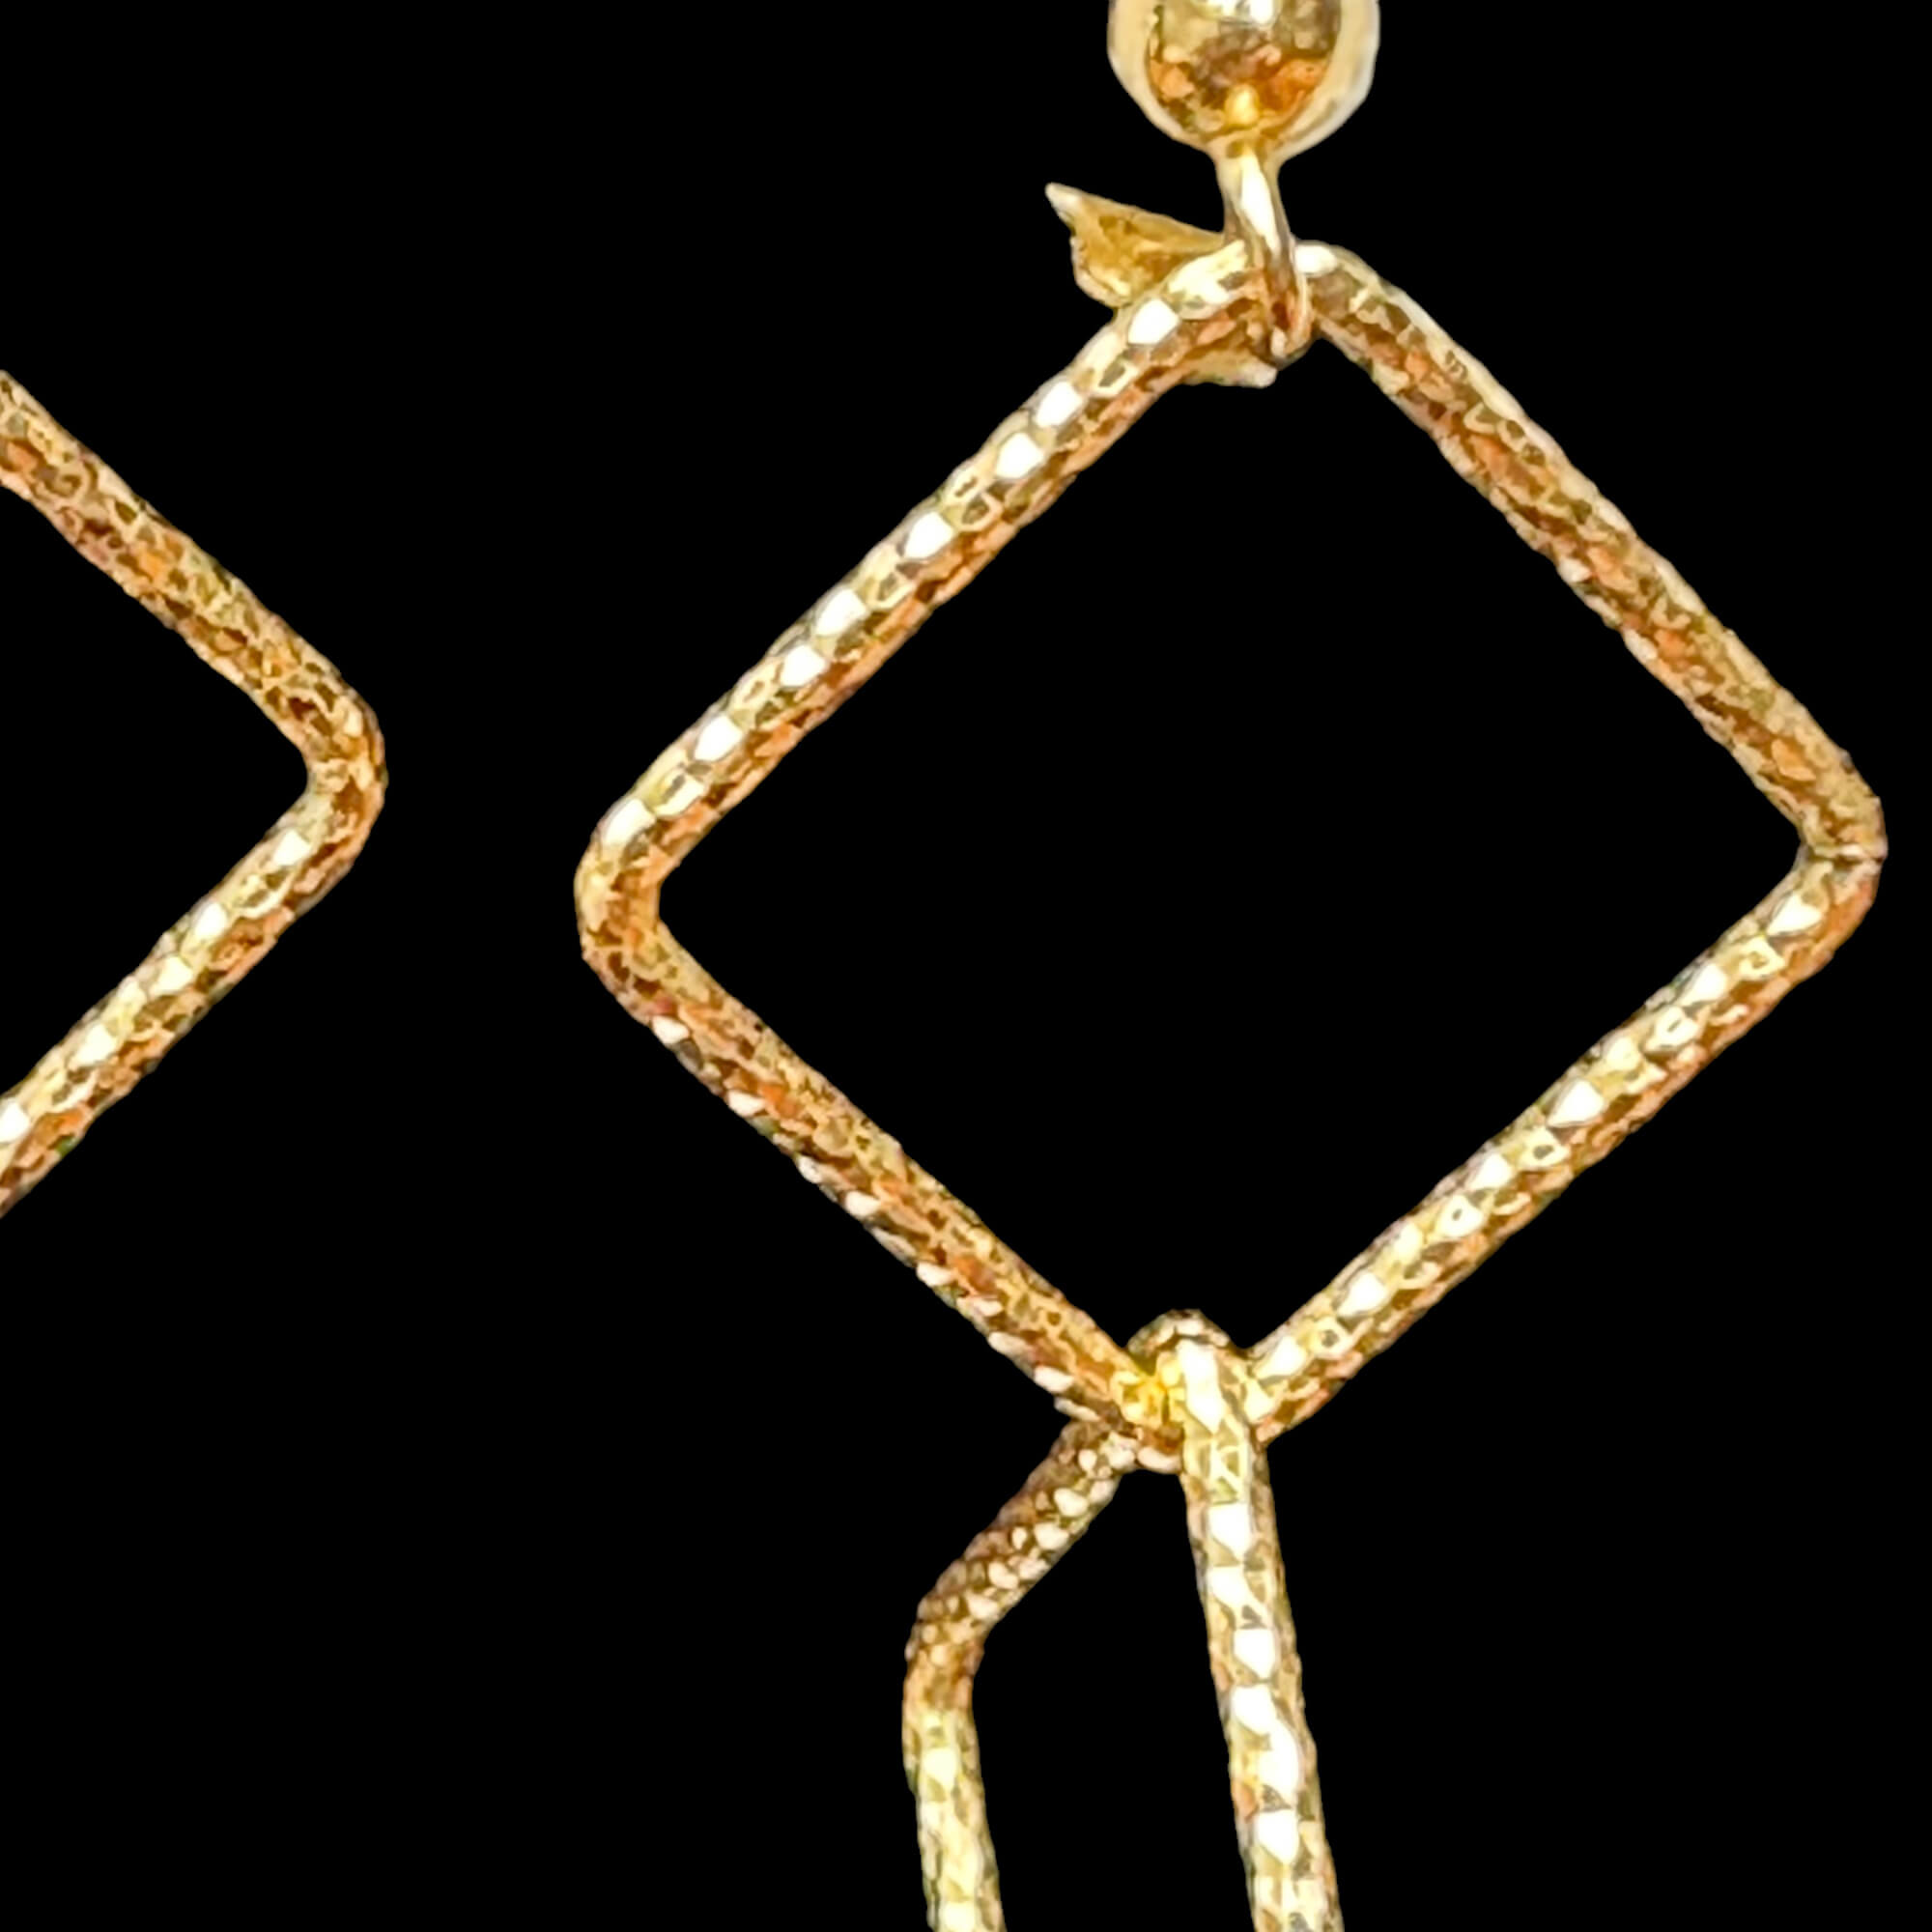 Gold-plated earrings with two open squares